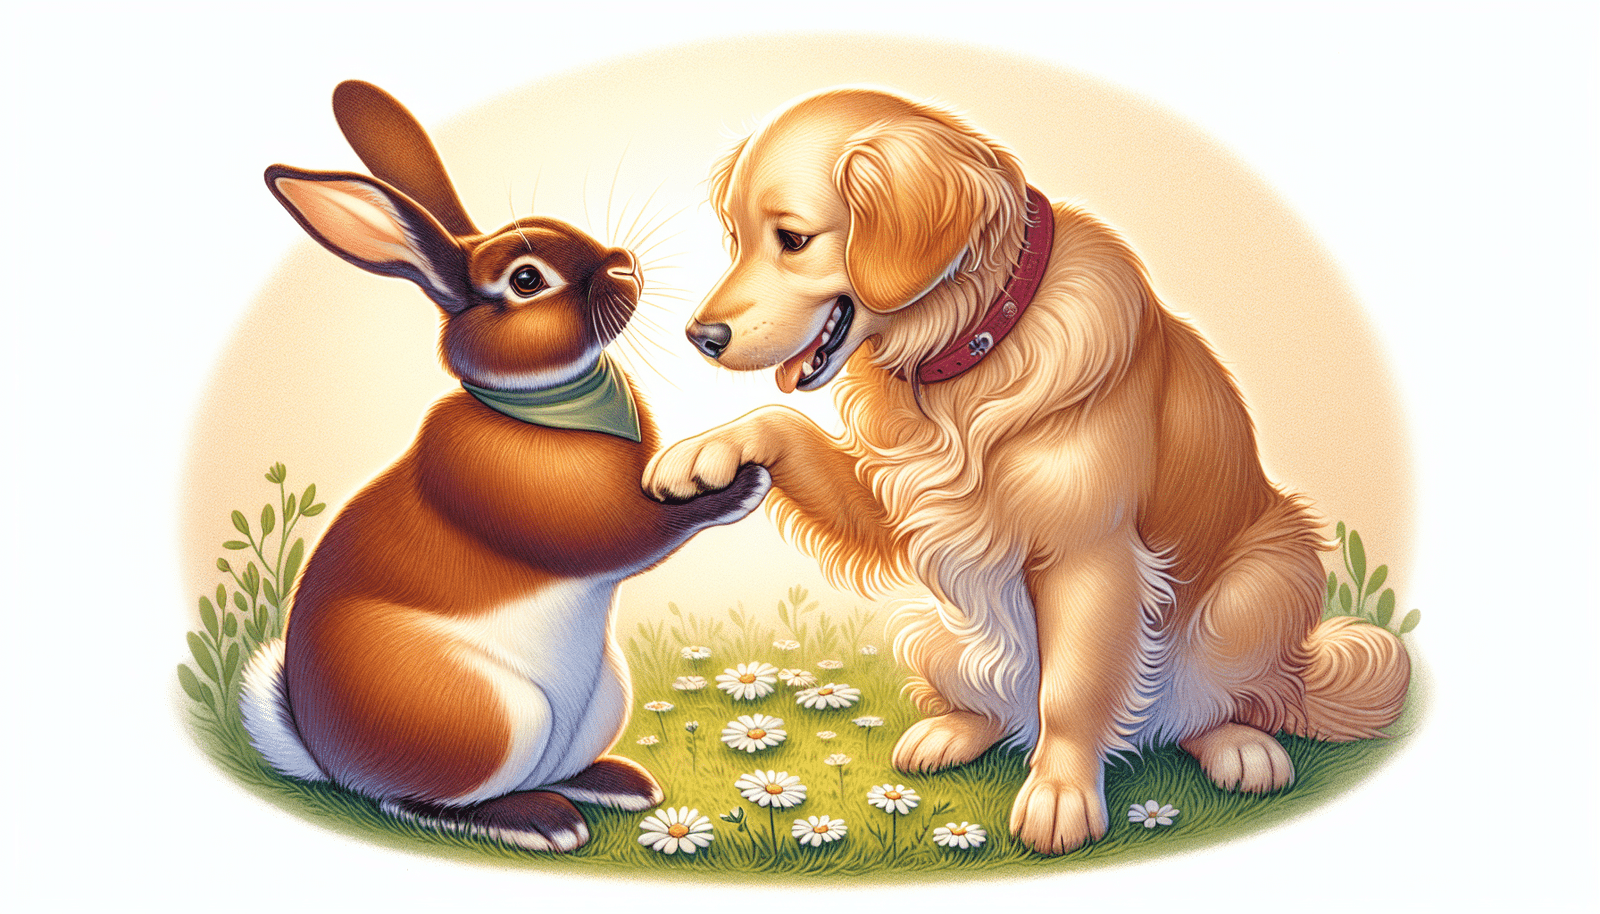 Illustration of a confident and sociable rabbit breed interacting with a dog